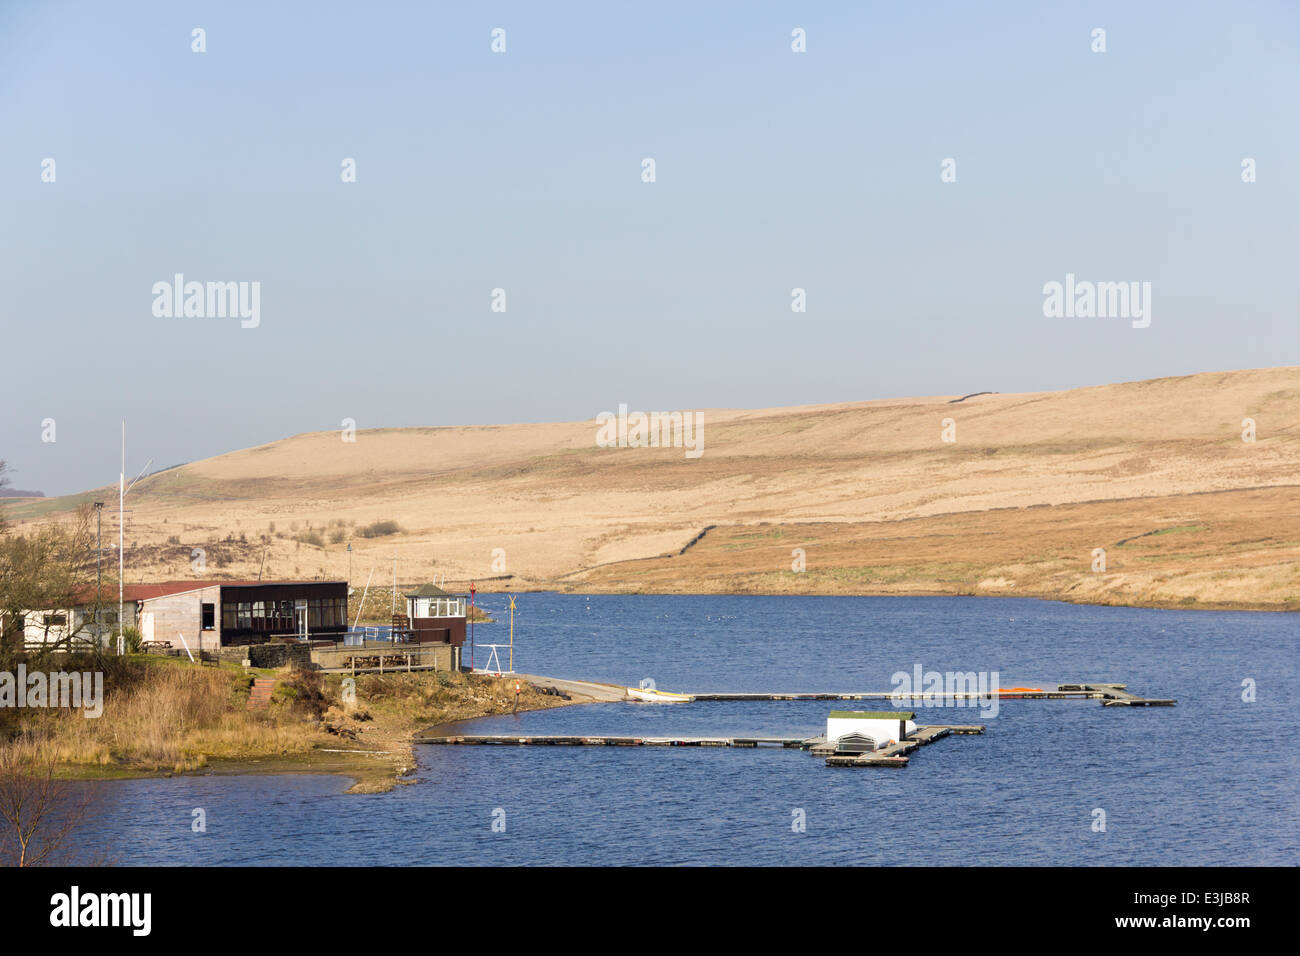 The clubhouse and landing stages at Bolton Sailing Club, based on Belmont reservoir, Belmont, Lancashire. Stock Photo